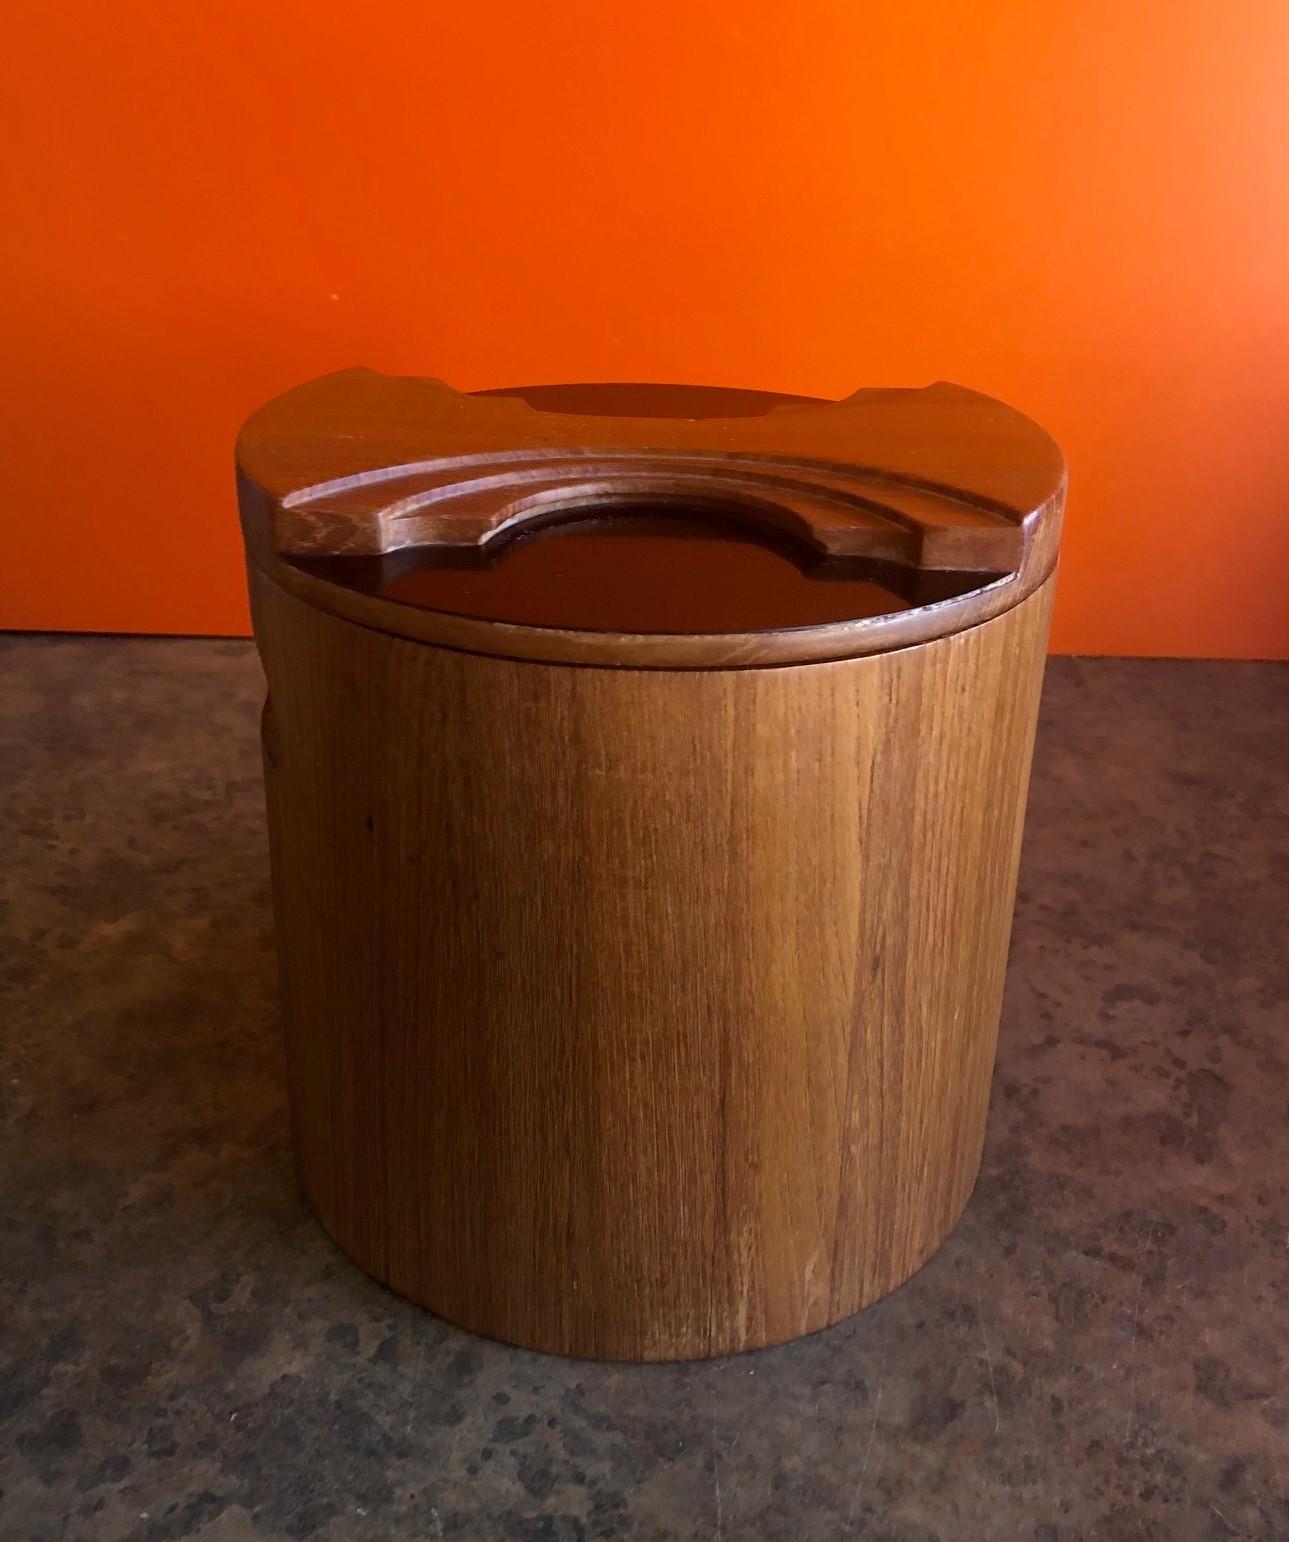 A very nice midcentury staved teak and black plastic ice bucket by Georges Briard, circa 1970s. The piece is very solid and sturdy.